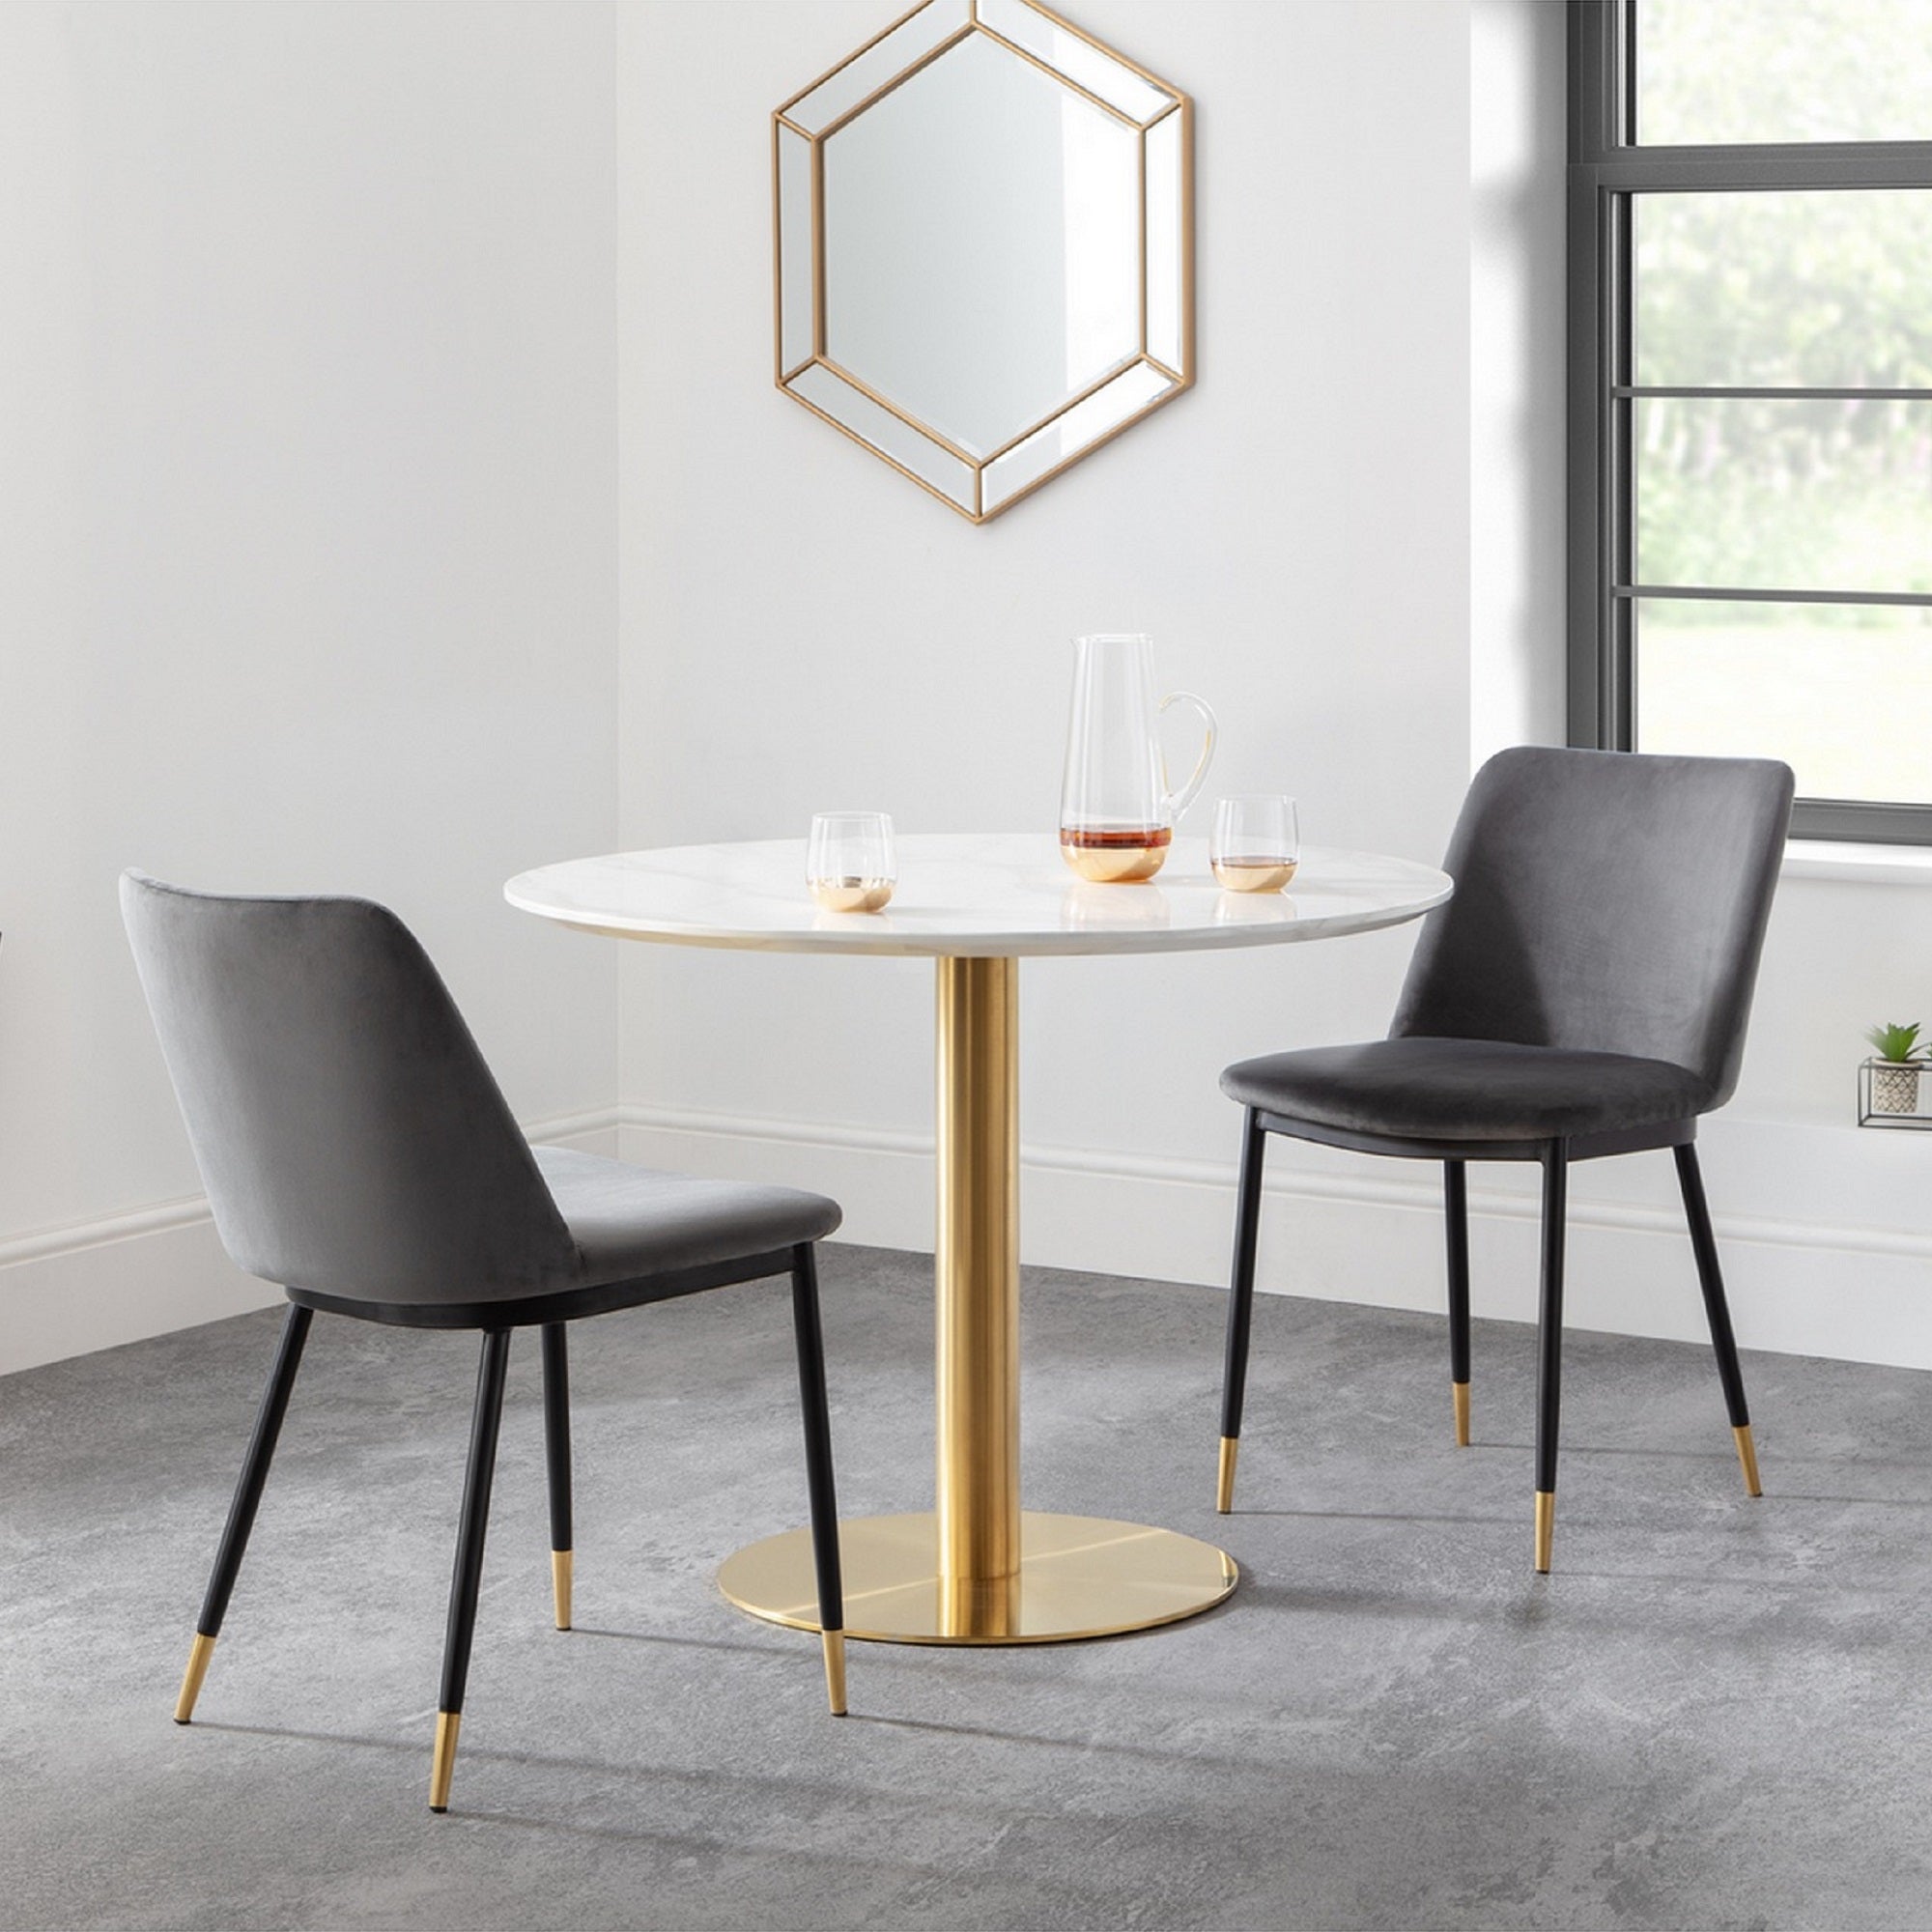 Palermo Round Dining Table With 2 Delaunay Chairs Grey